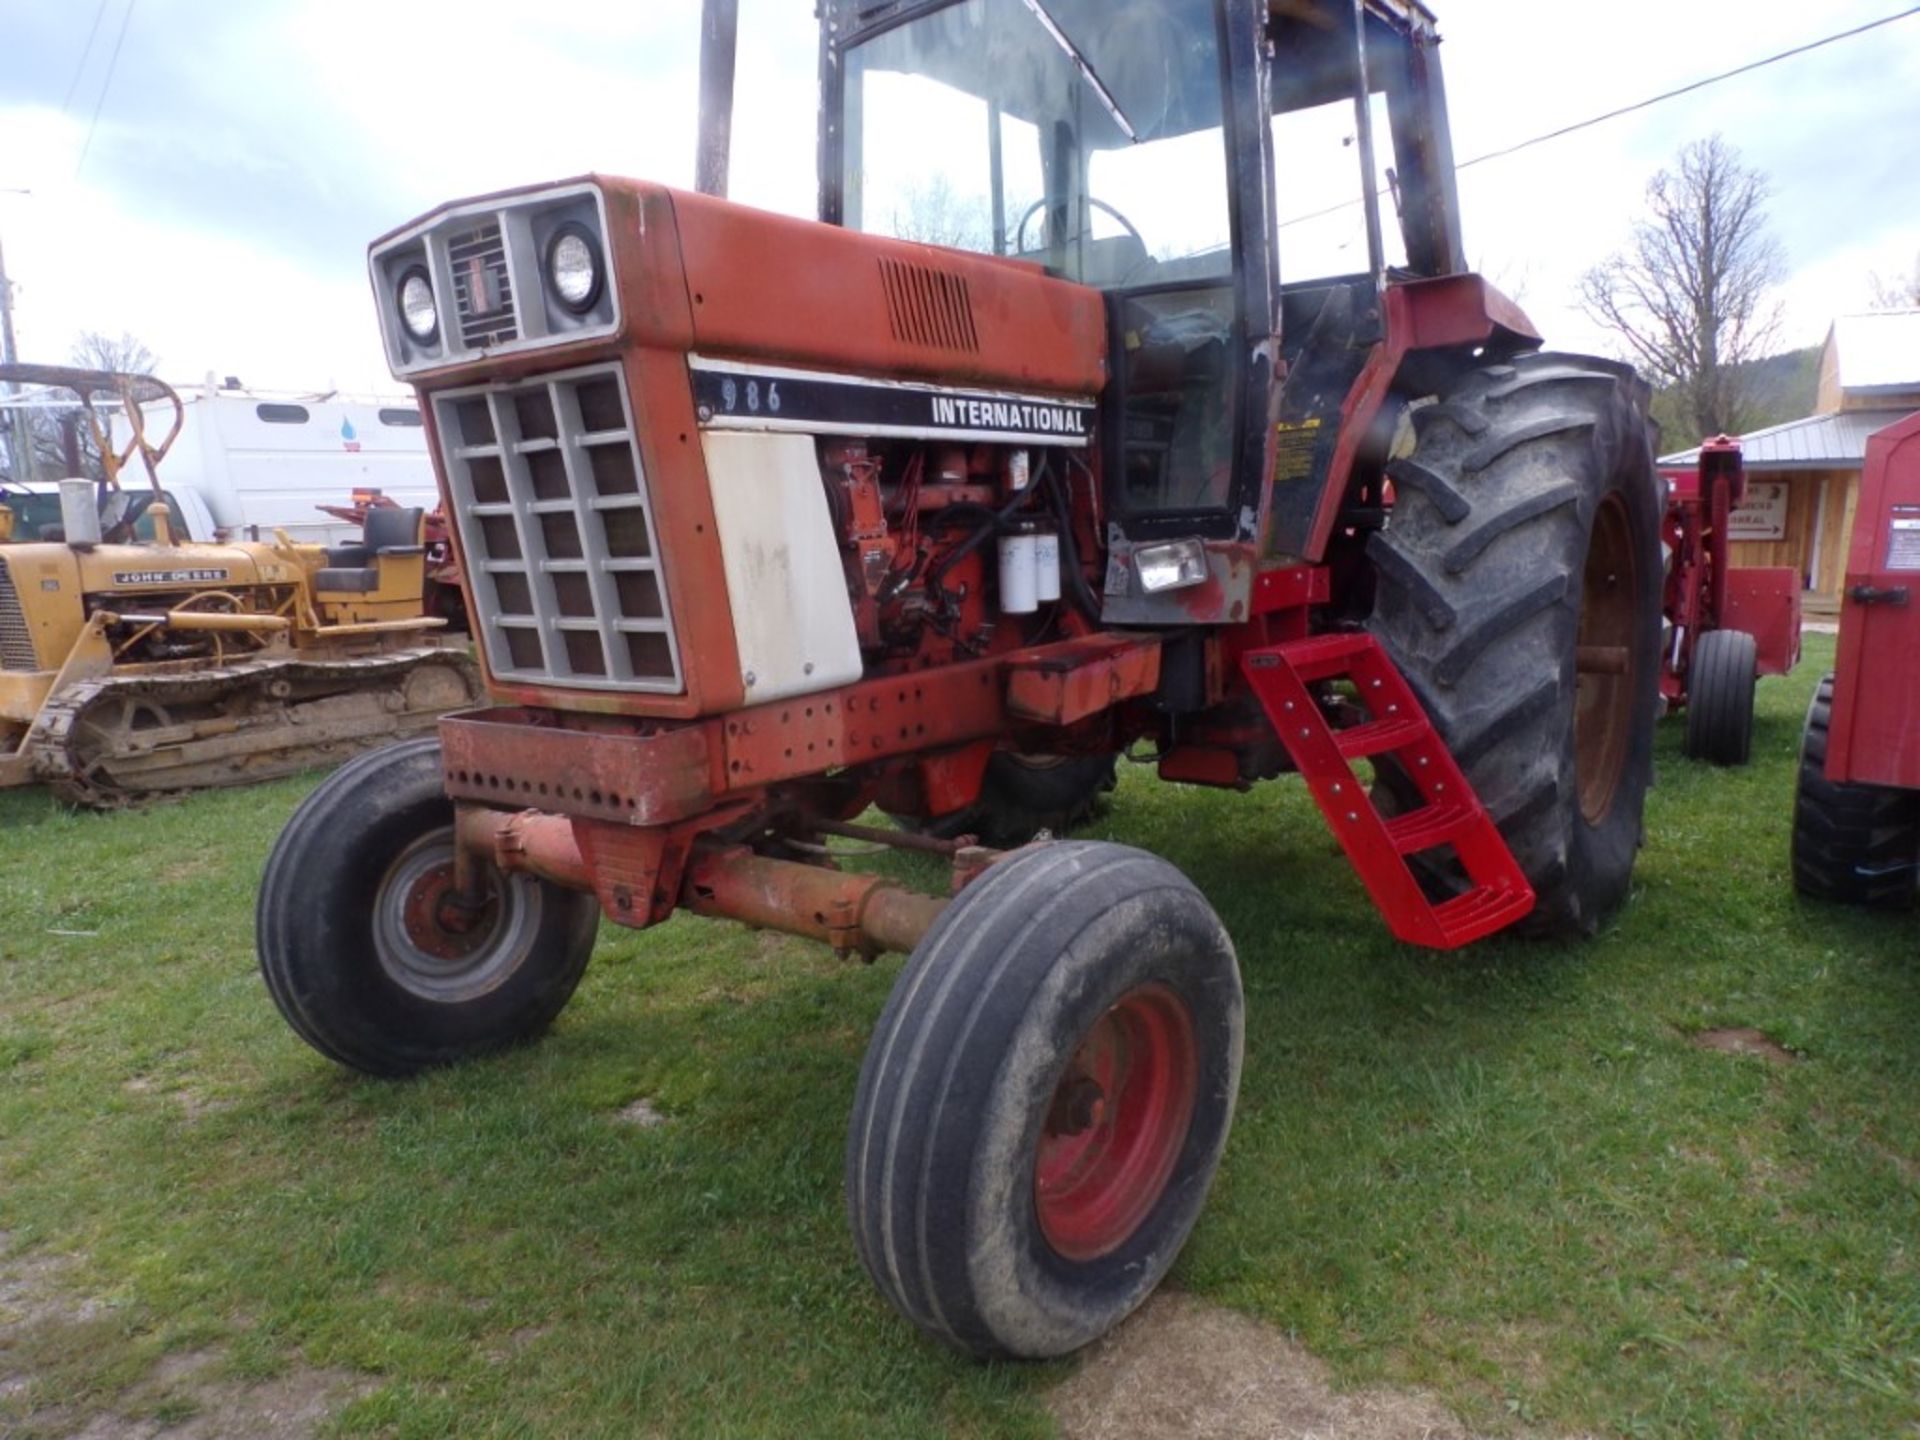 International 986, 2WD, TA Works Good, (2) PTOs, Dual Remote, No Doors, Can't See Hours (5470) - Image 2 of 4